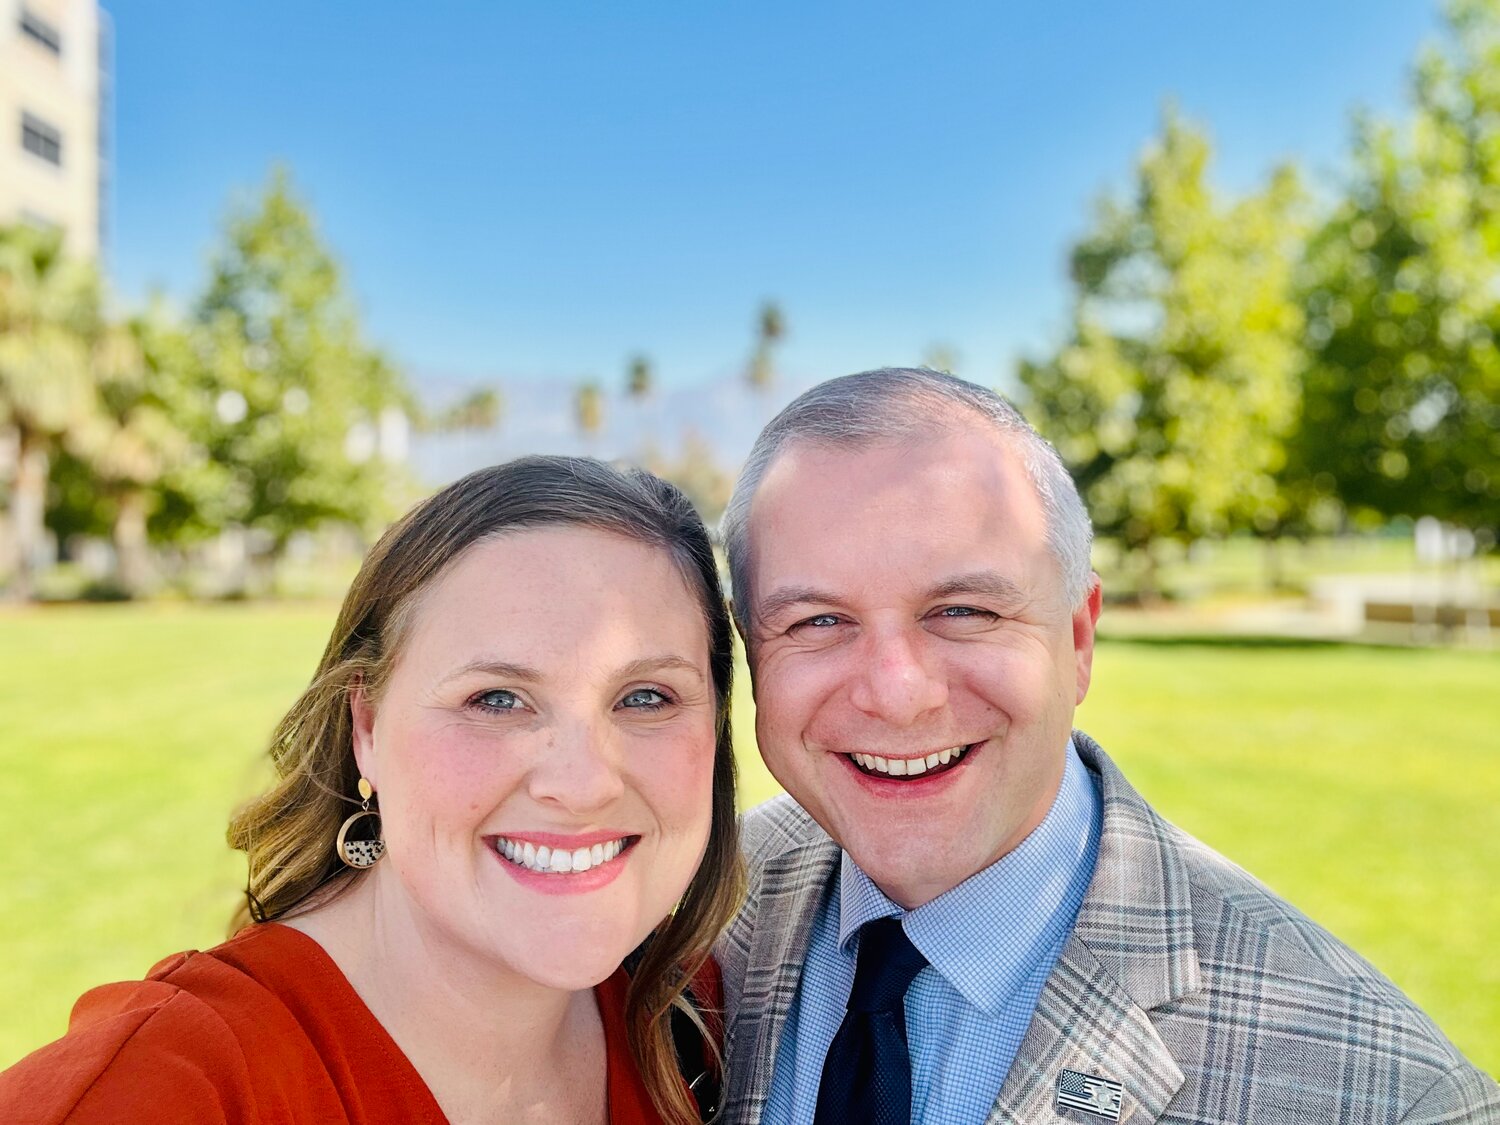 Kelsie Saefkow poses for a photo with her husband, Georgia Baptist Convention President Josh Saefkow.